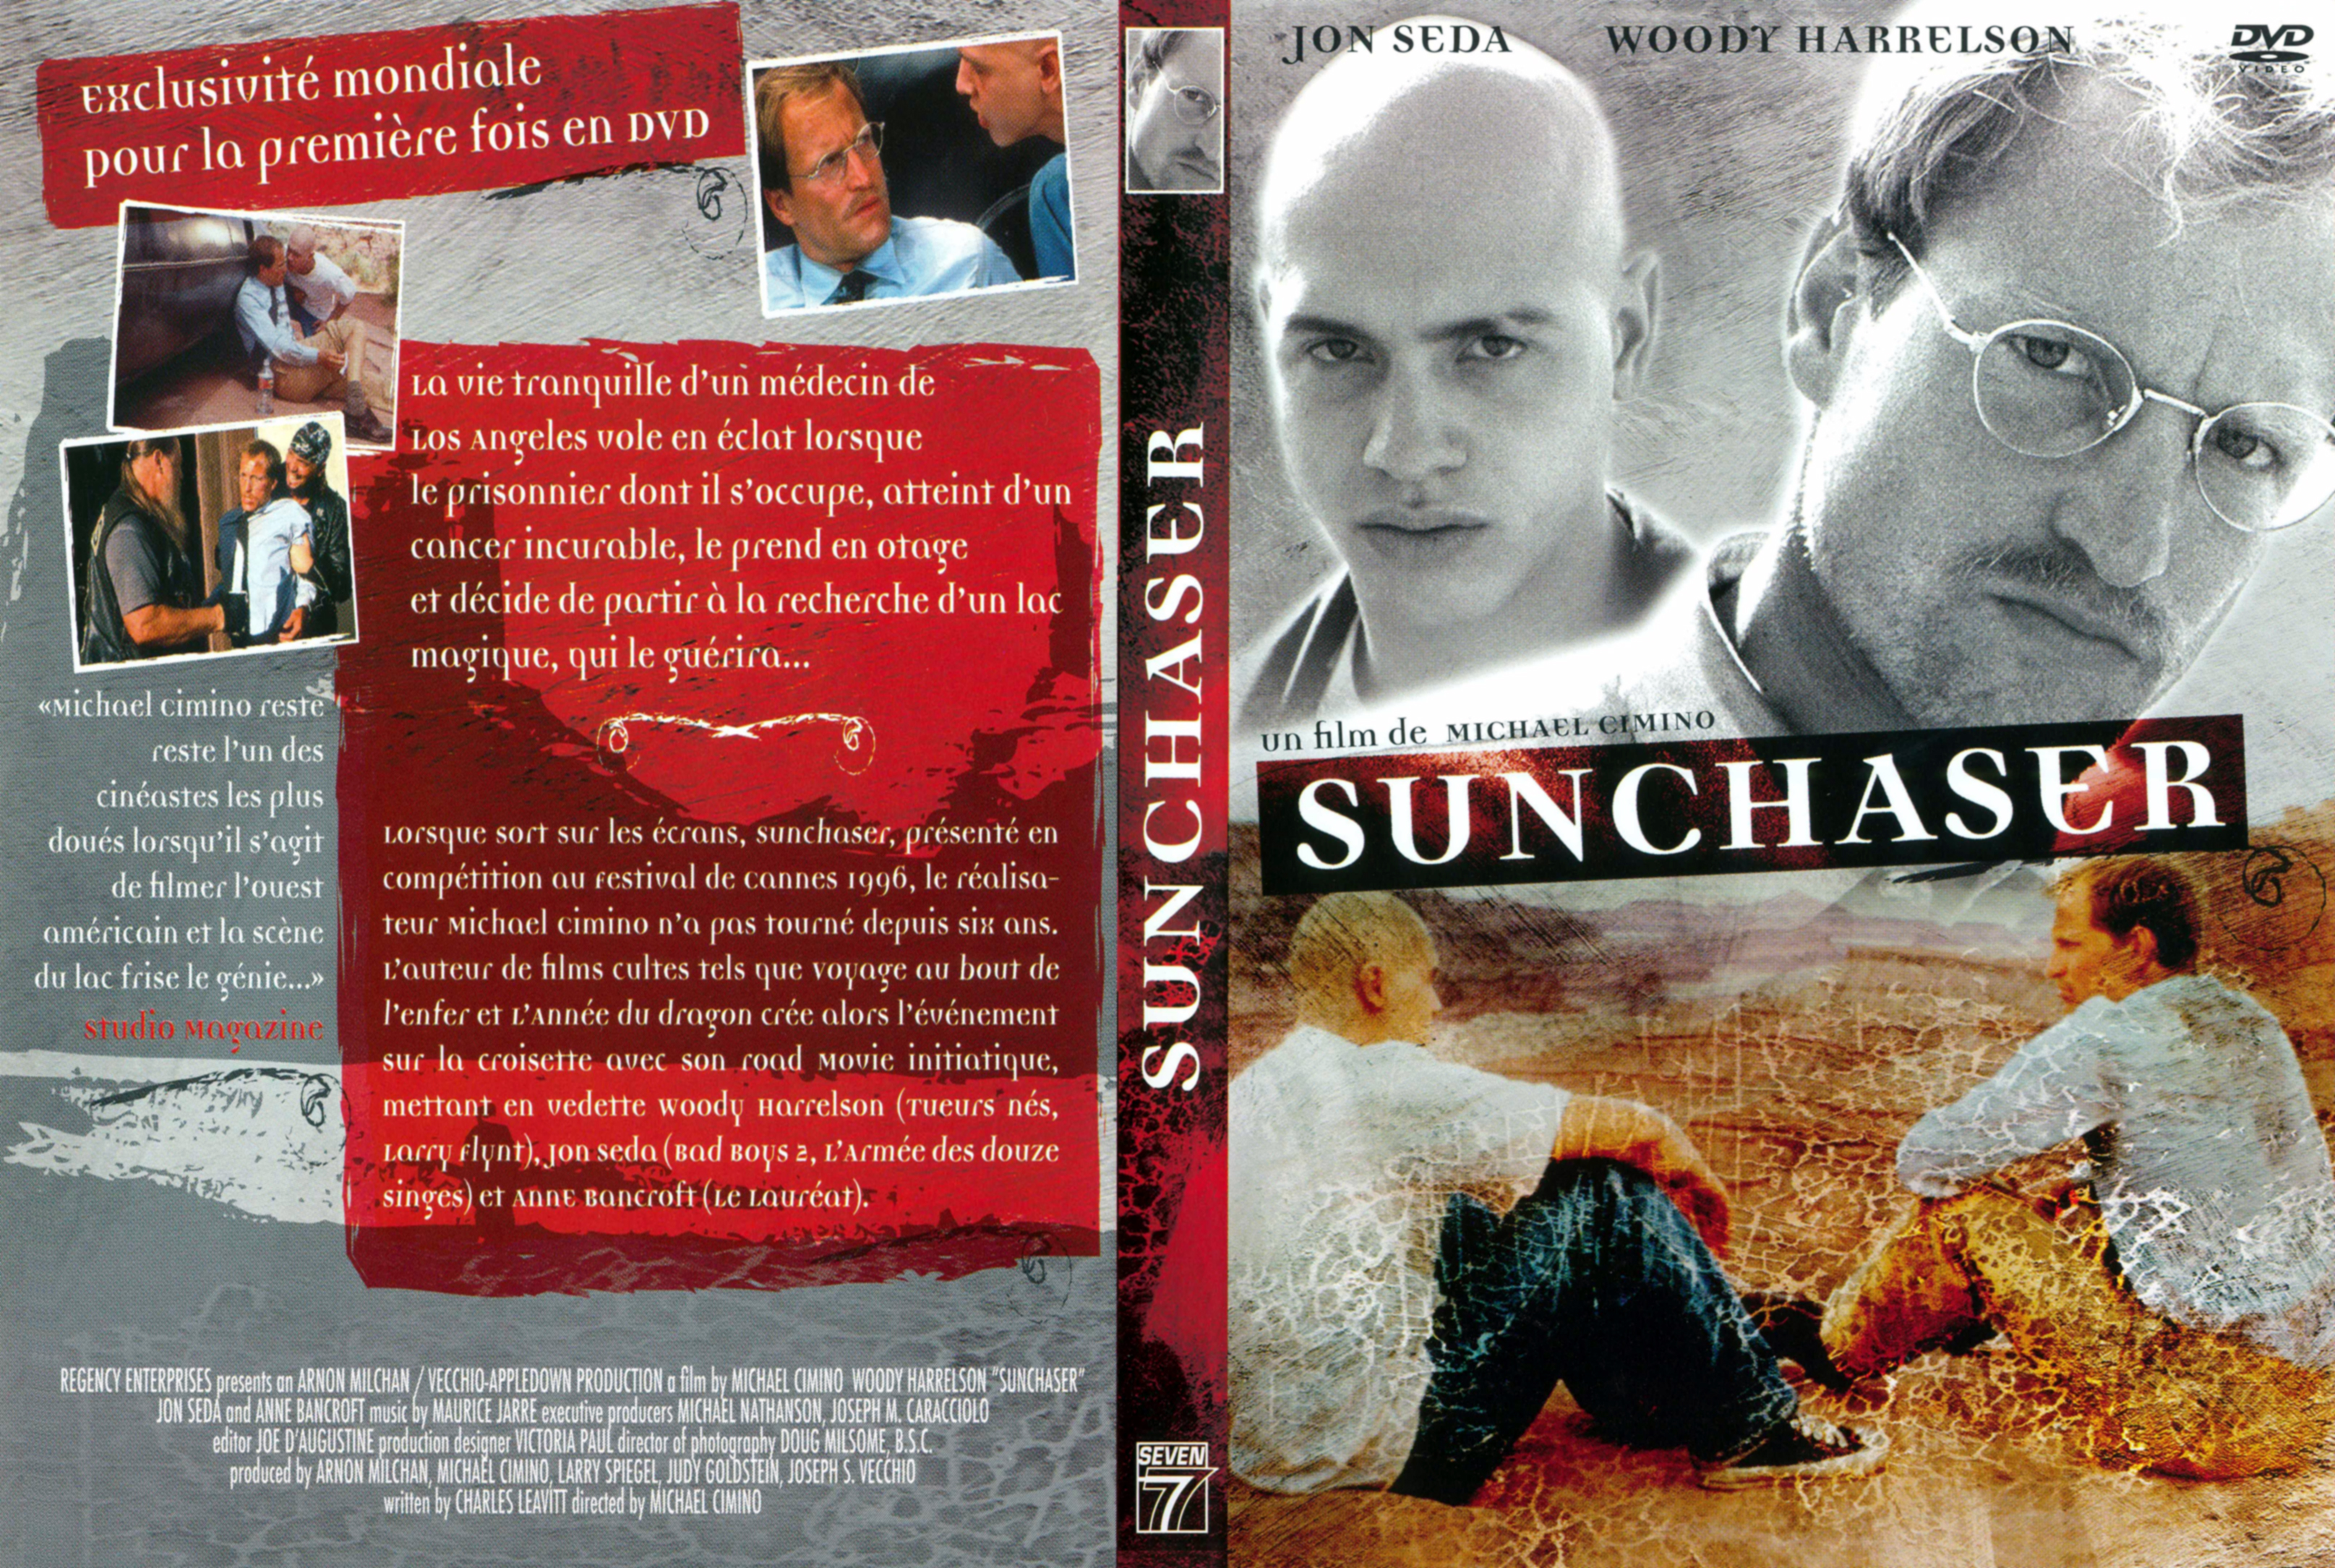 Jaquette DVD Sunchaser